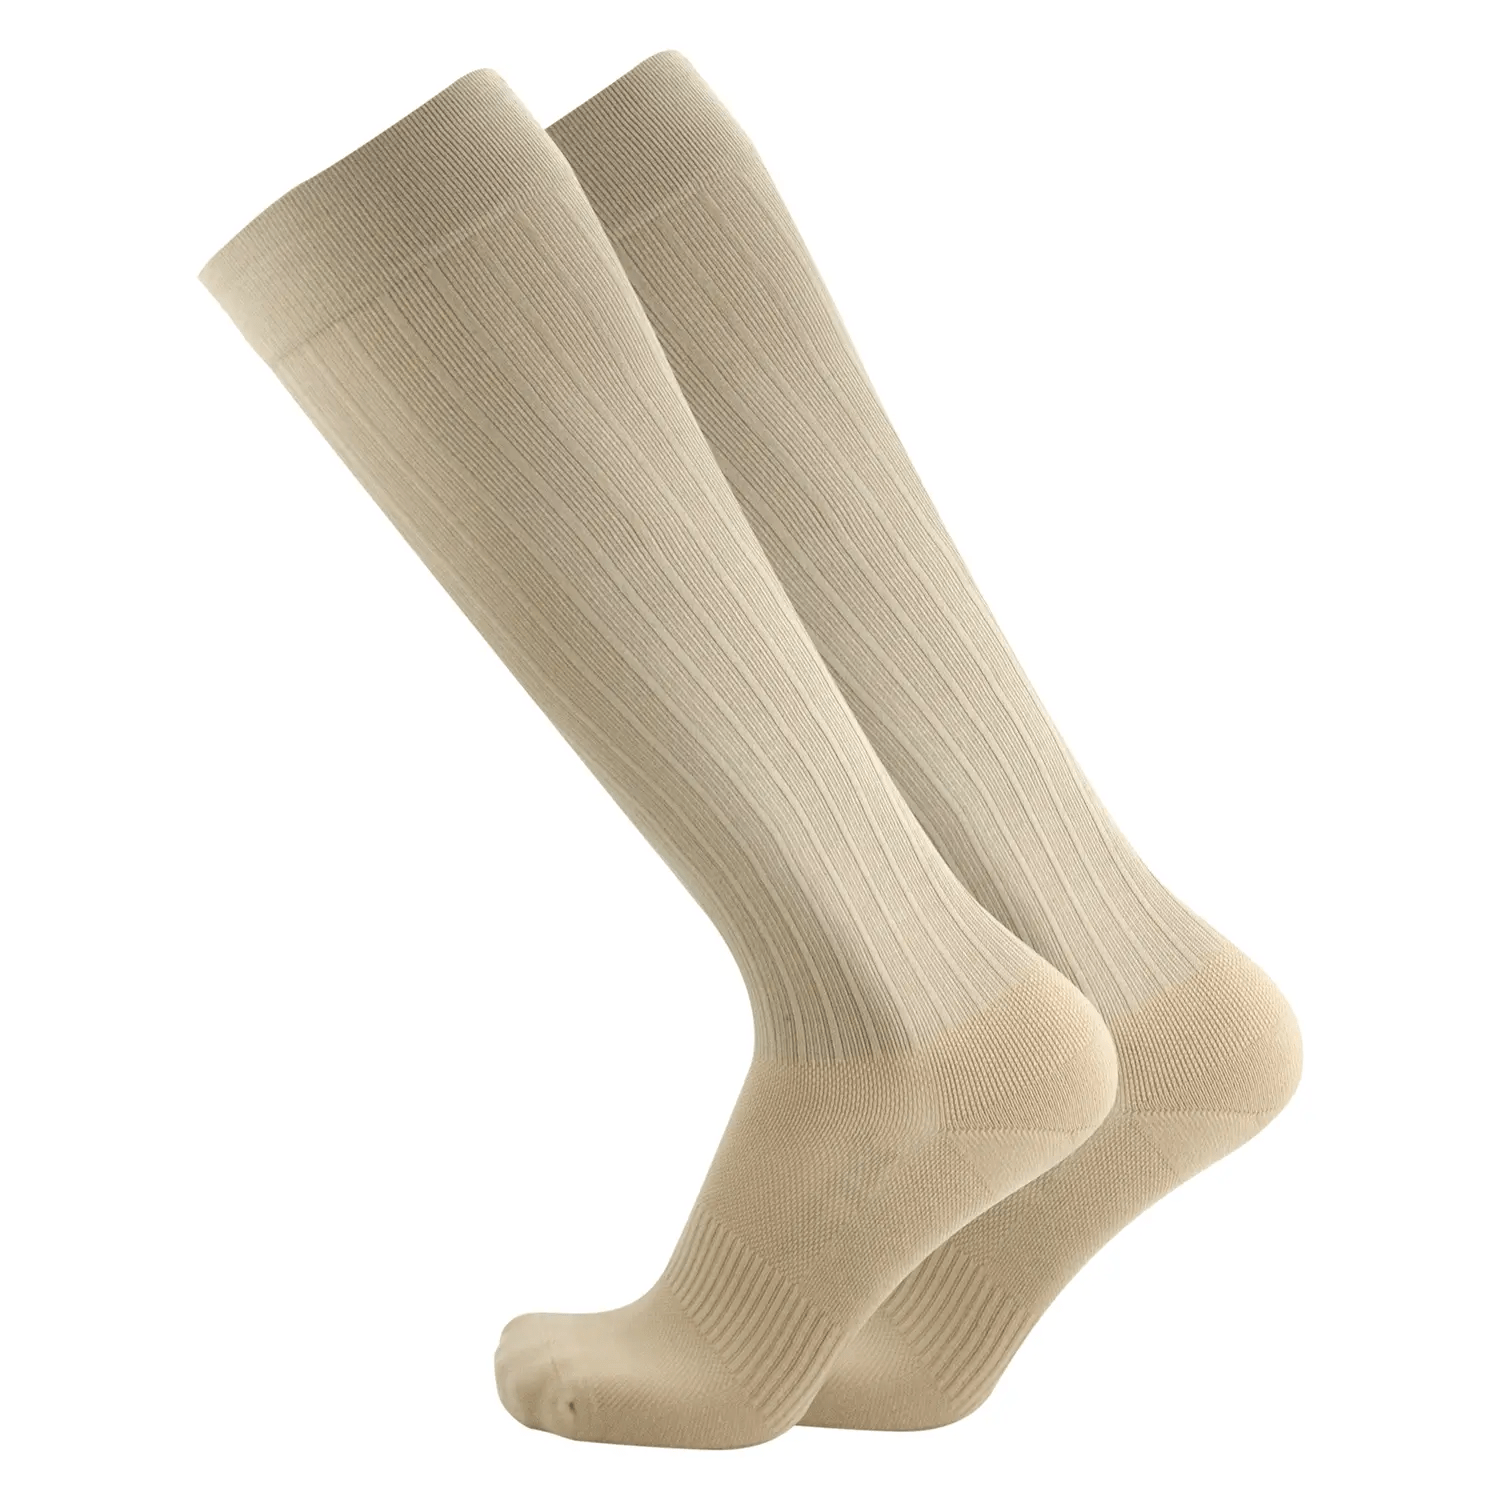 TS5 Travel Socks for Lower Leg and foot pain &amp; swelling